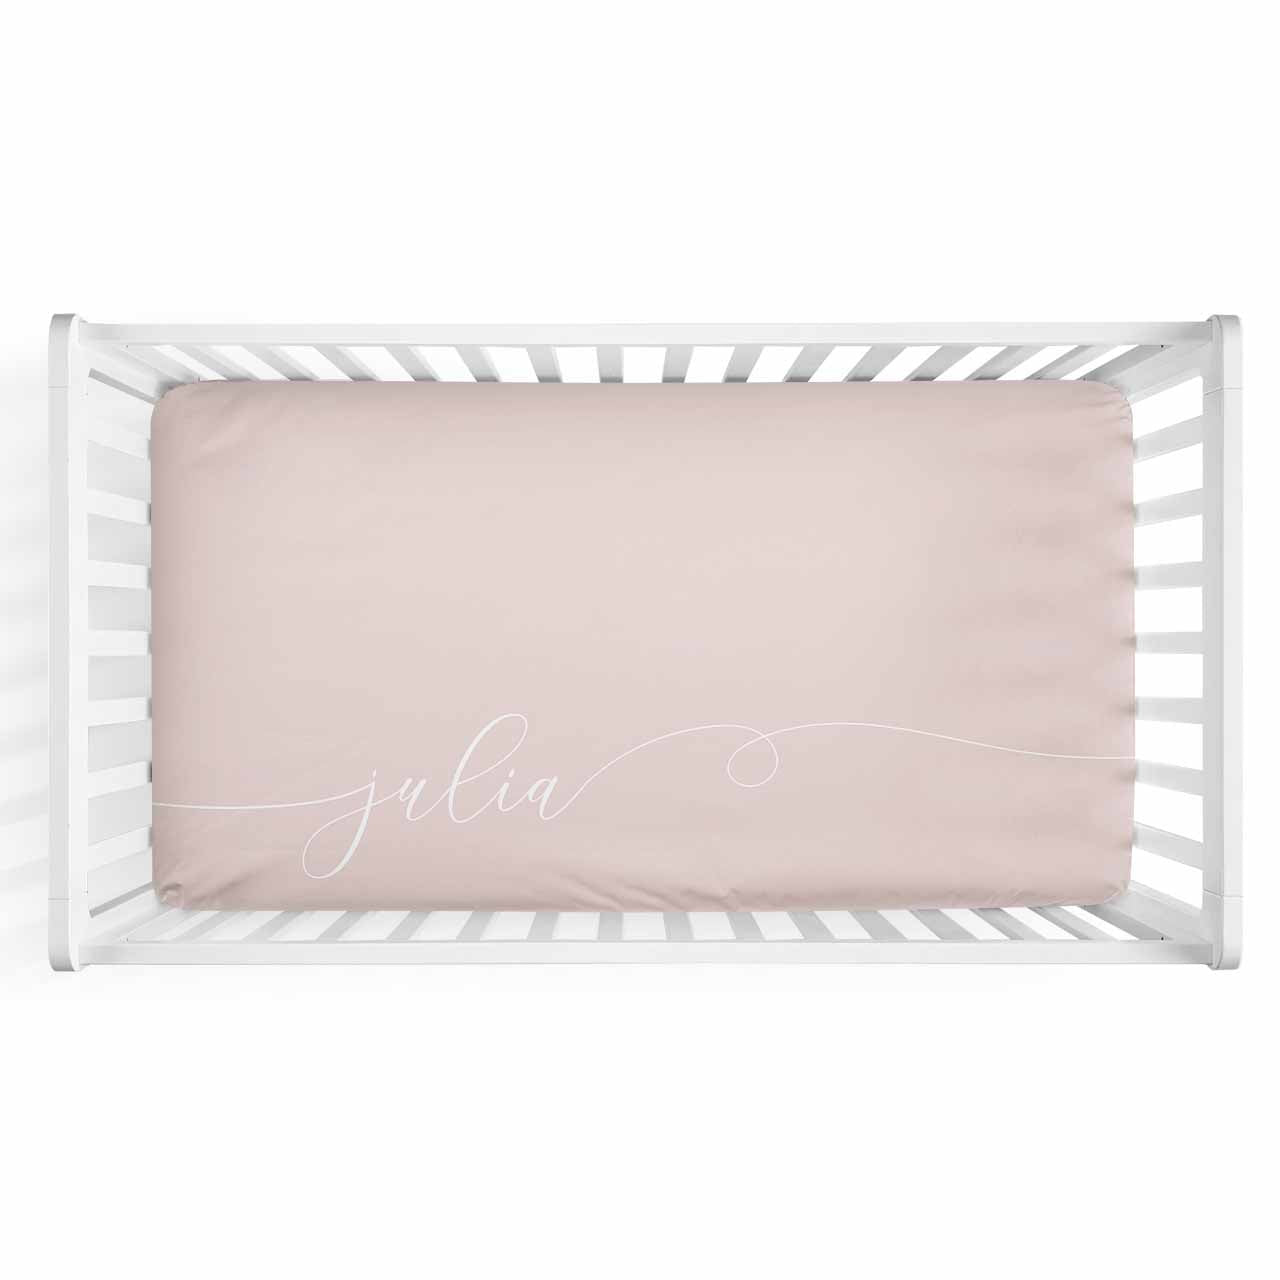 Personalized Baby Name Blush Color Jersey Knit Crib Sheet in Swash Line Script Style